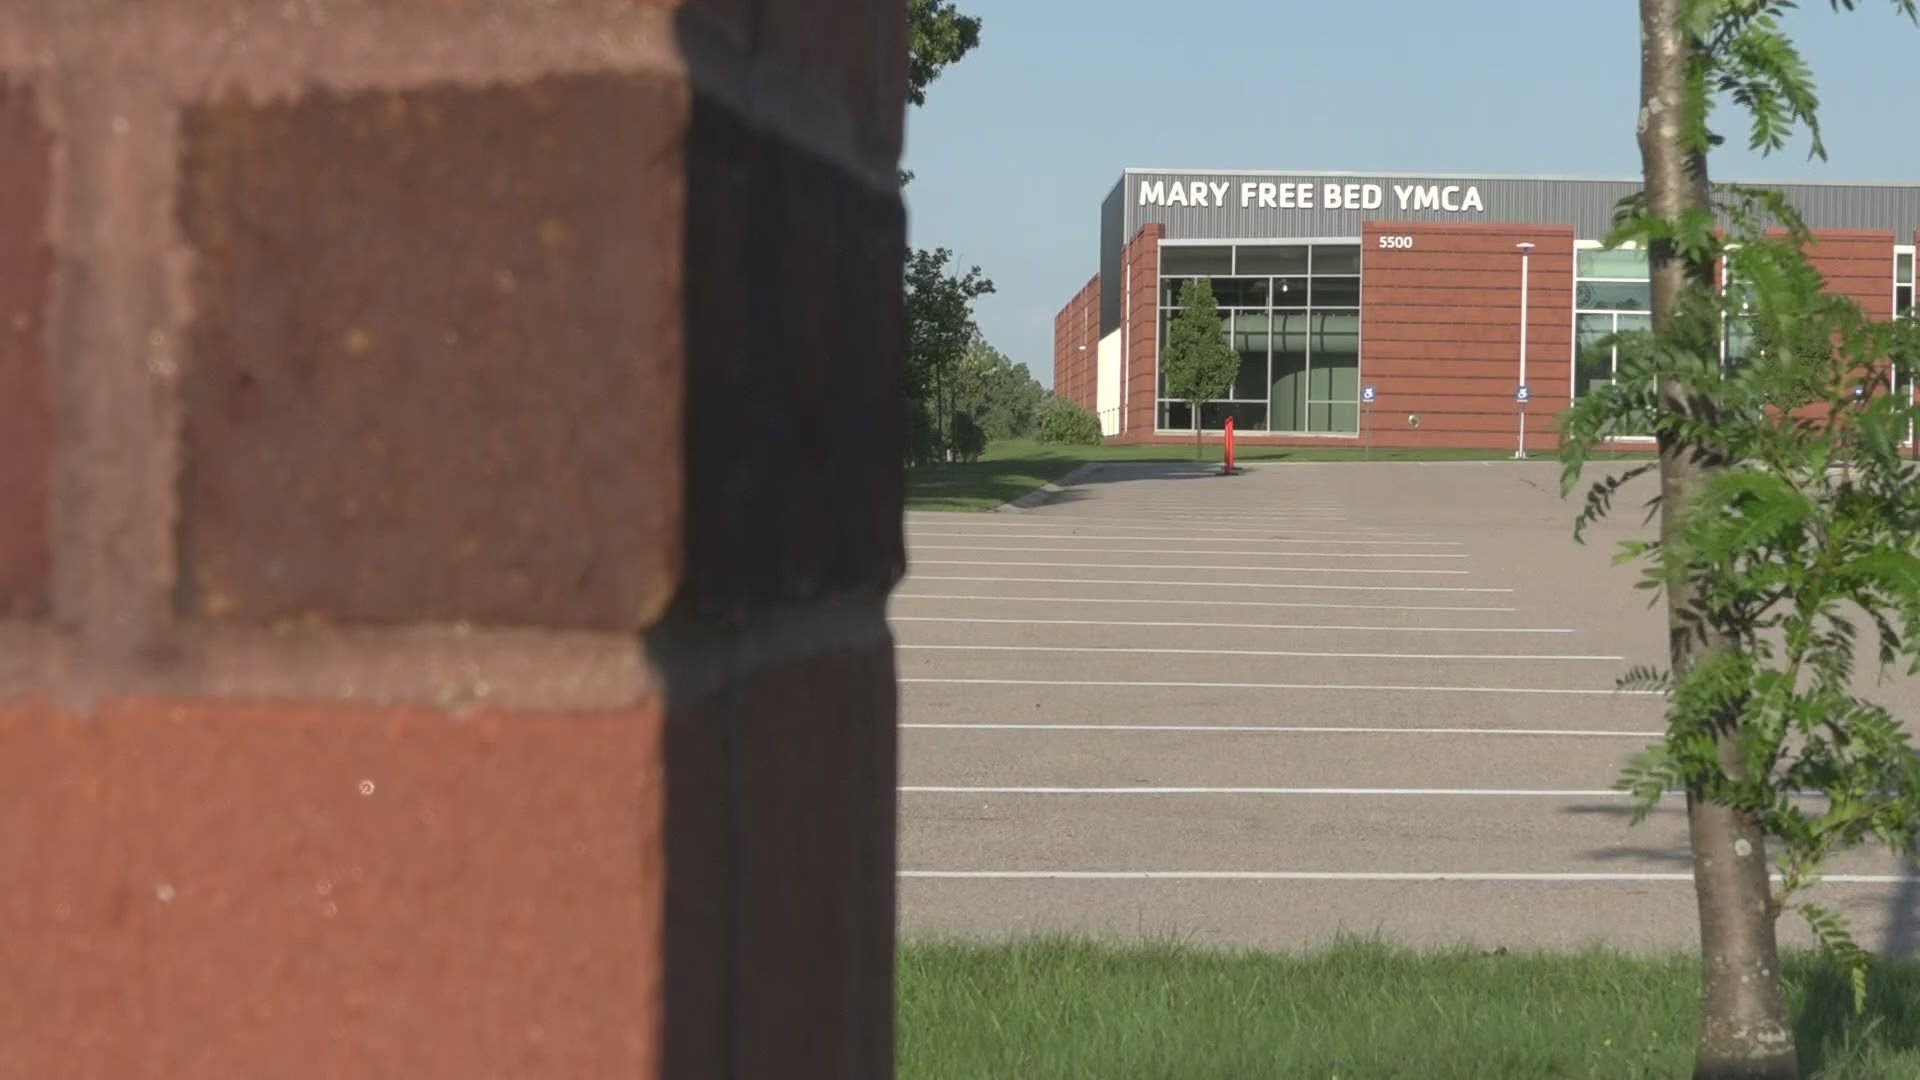 Staff were laid off at seven YMCA locations in Kent County.